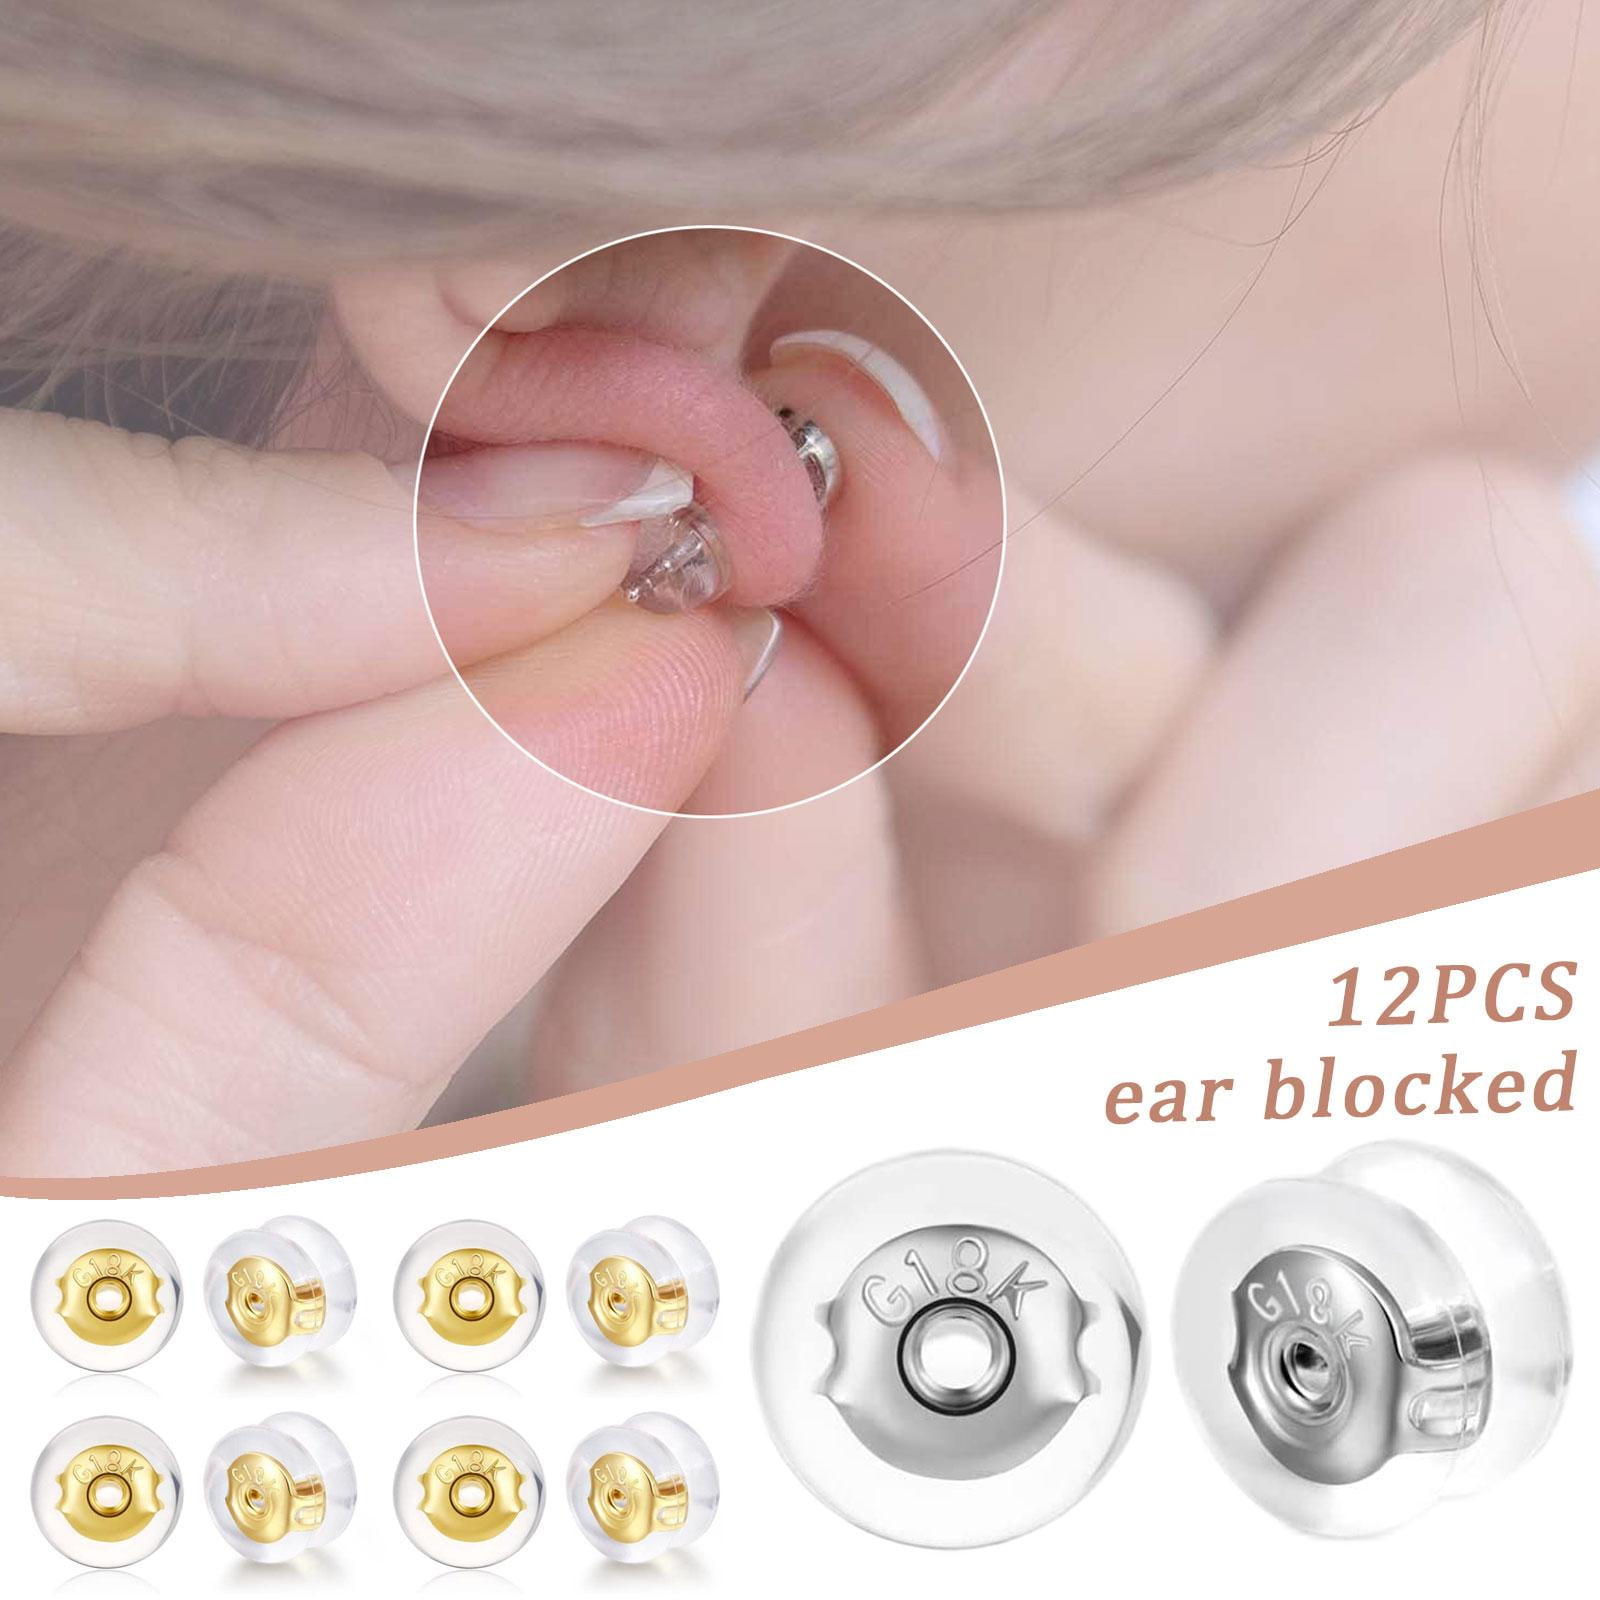 DELECOE Silicone Earring Backs for Studs Droopy Ears Hoops Wires,Locking  Secure Earring Backs for Heavy Earring,No-Irritate Hypoallergenice Soft  Clear